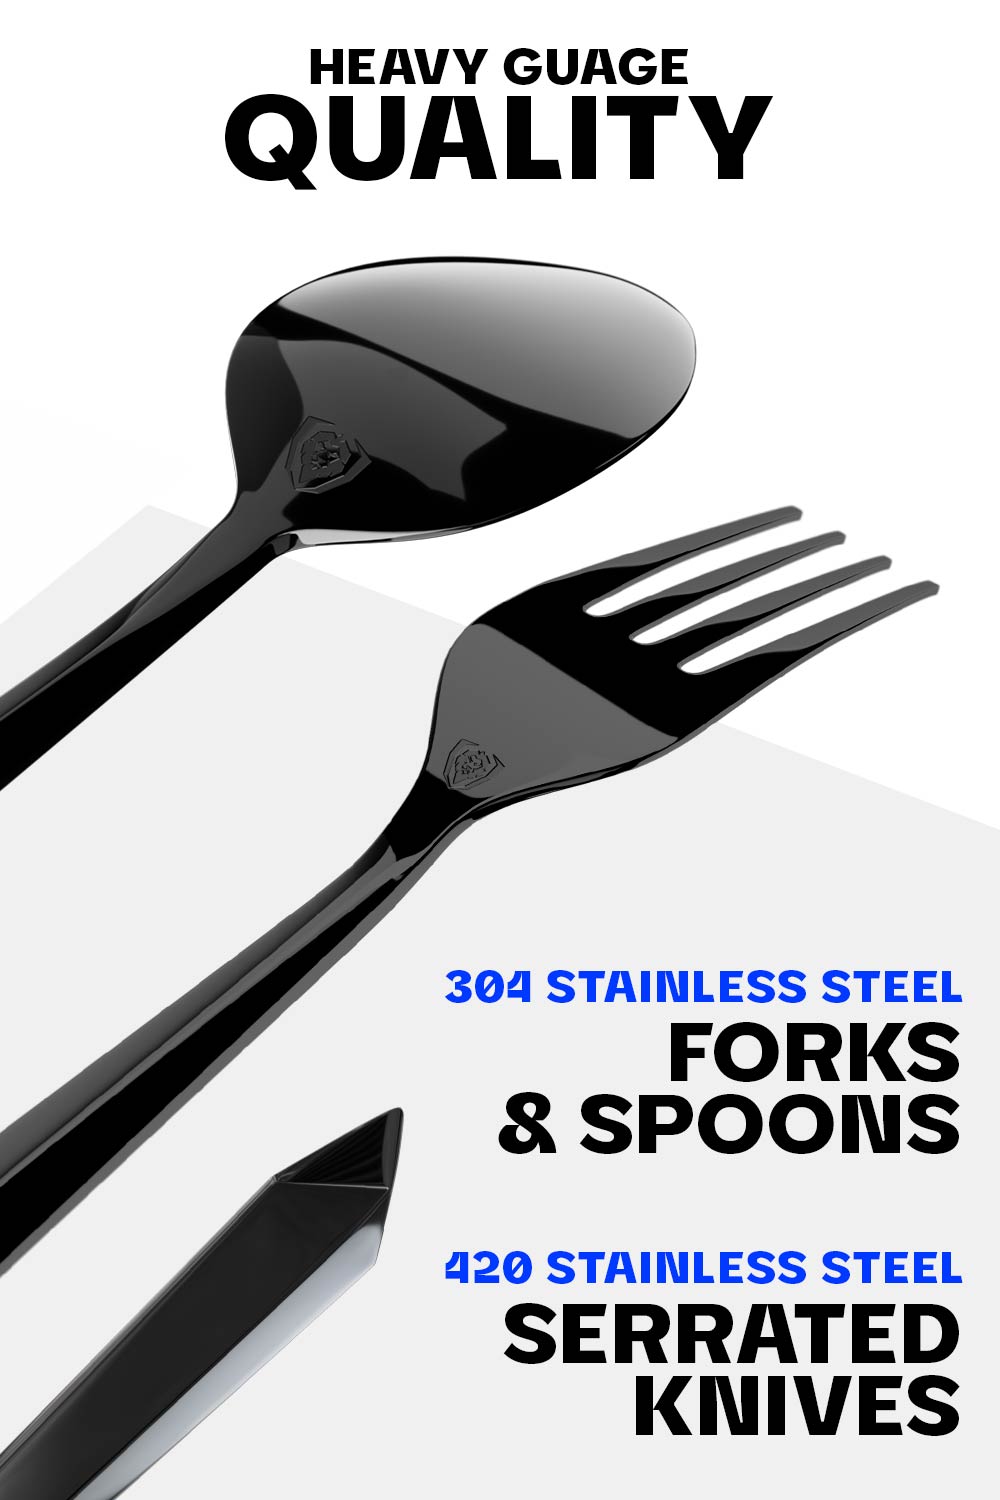 Dalstrong 20 piece flatware cutlery set black stainless steel service of 4 showcasing it's stainless steel forks and spoons.